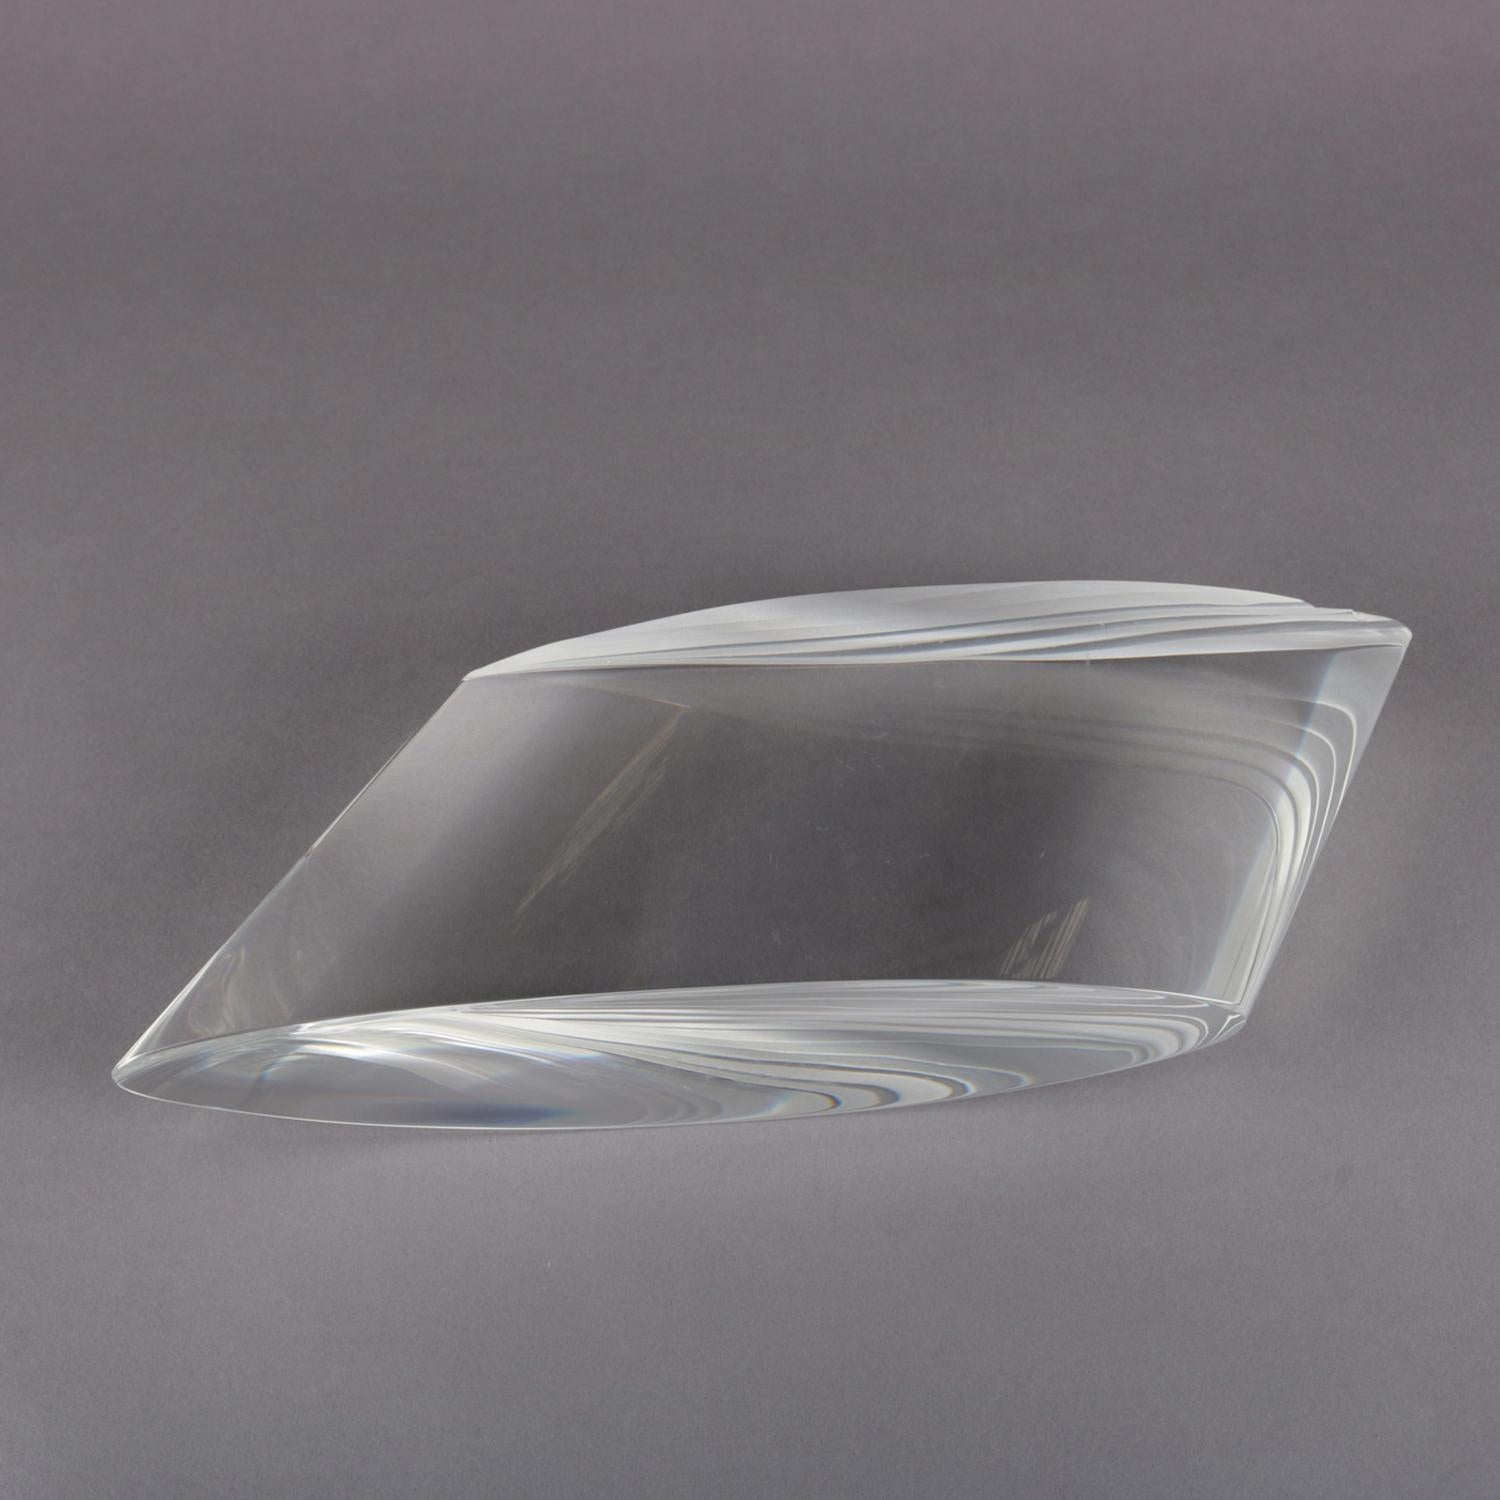 Contemporary Thomas Brzon art glass sculpture features polished optic glass oblique cylinder with concave top surface, signed along bottom Brzon Thomas, 20th century

Measures: 5